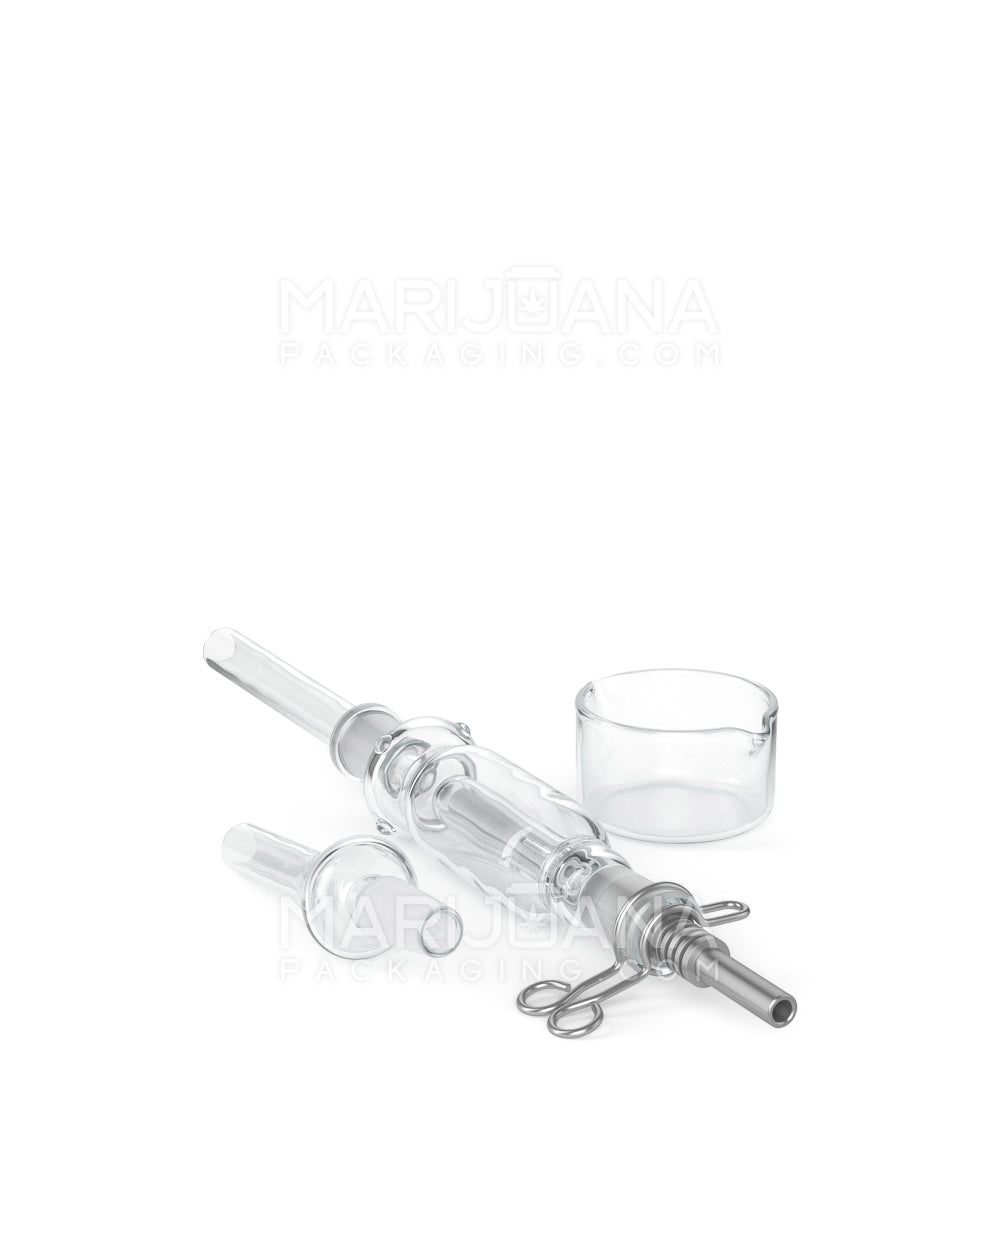 Nectar Collector Dab Pipe | 6in Long - 10mm Attachment - Clear - 7